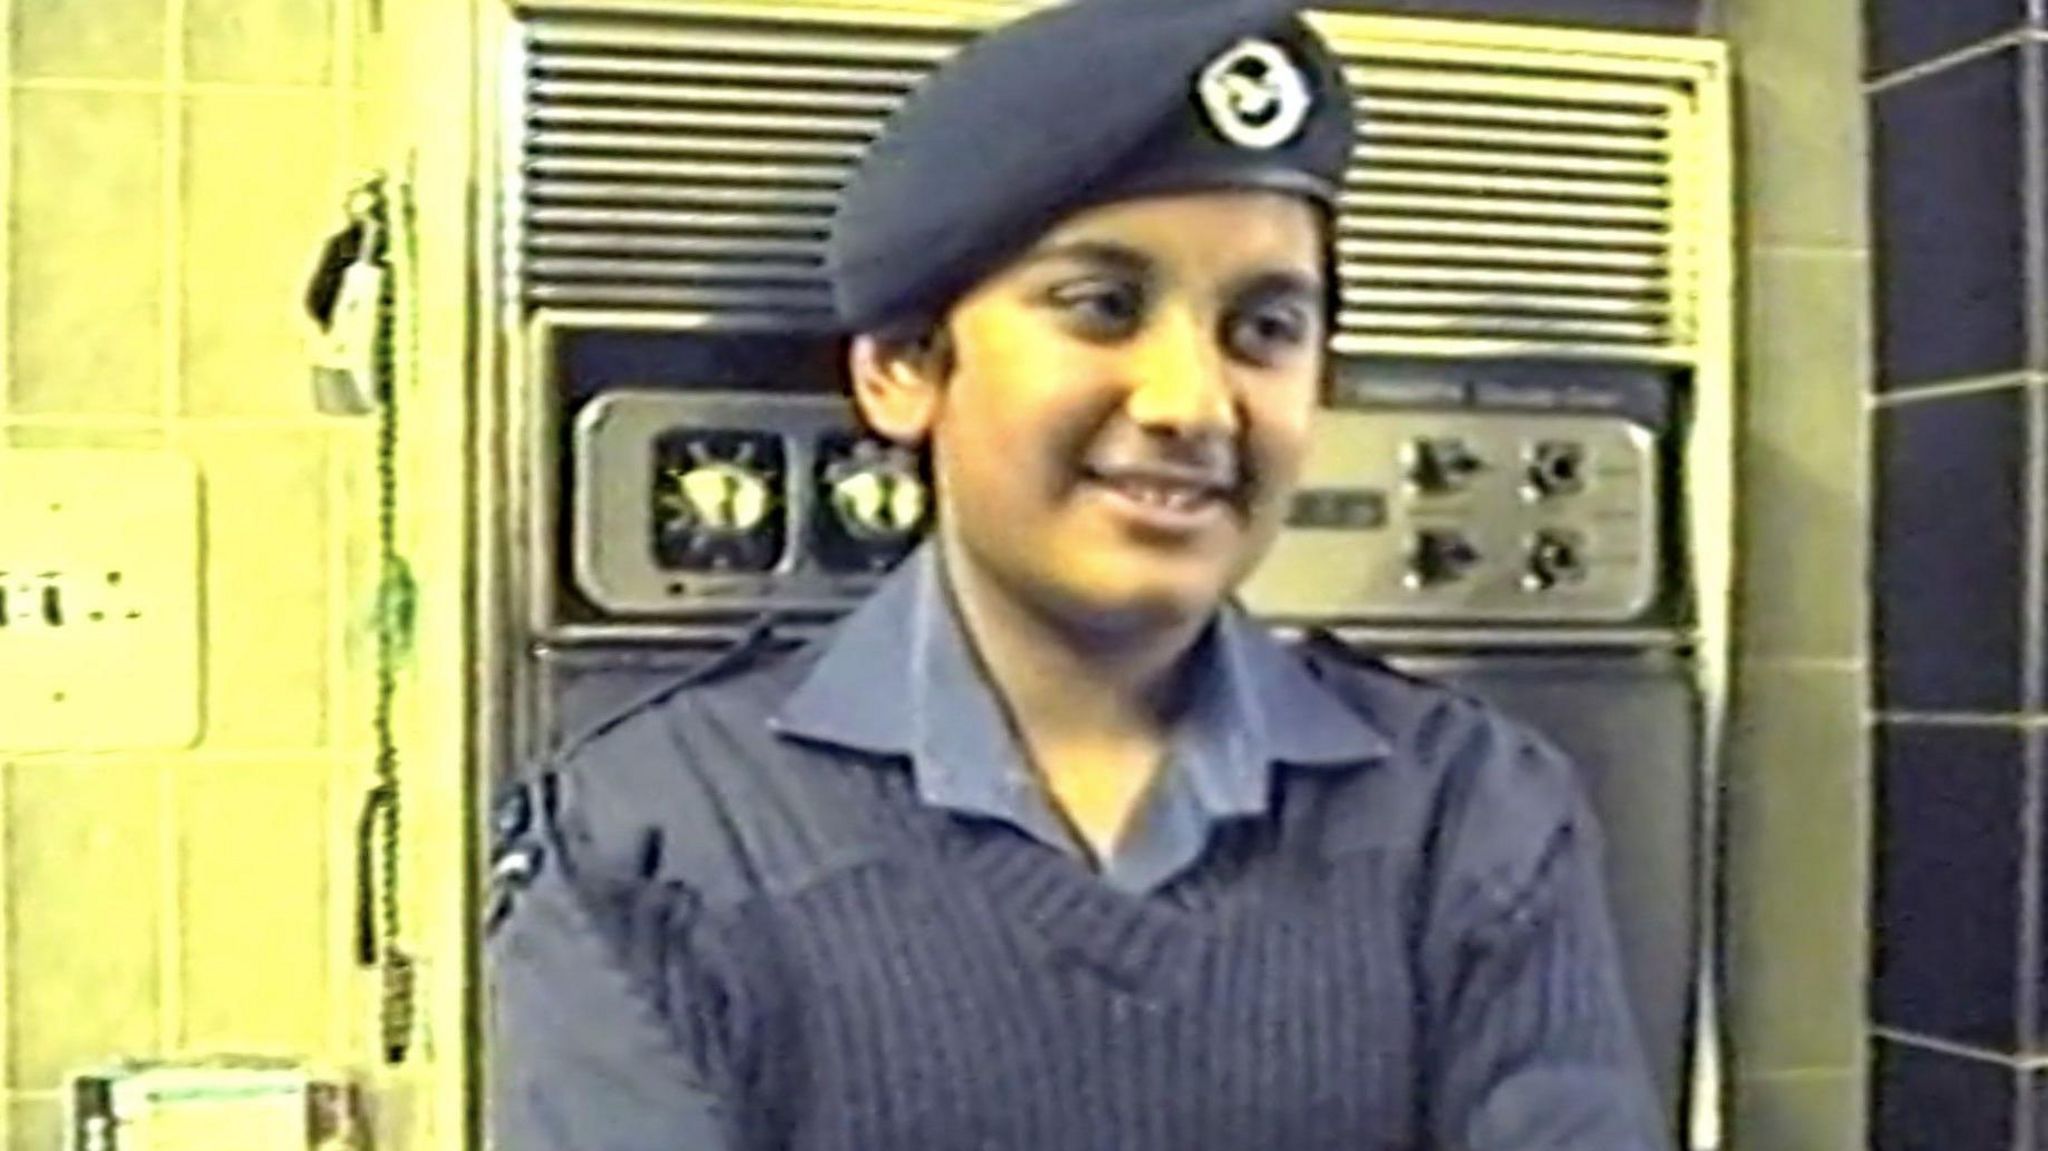 A young Ferhan in wearing a blue RAF cadet uniform and beret standing in front of a kitchen oven and smiling